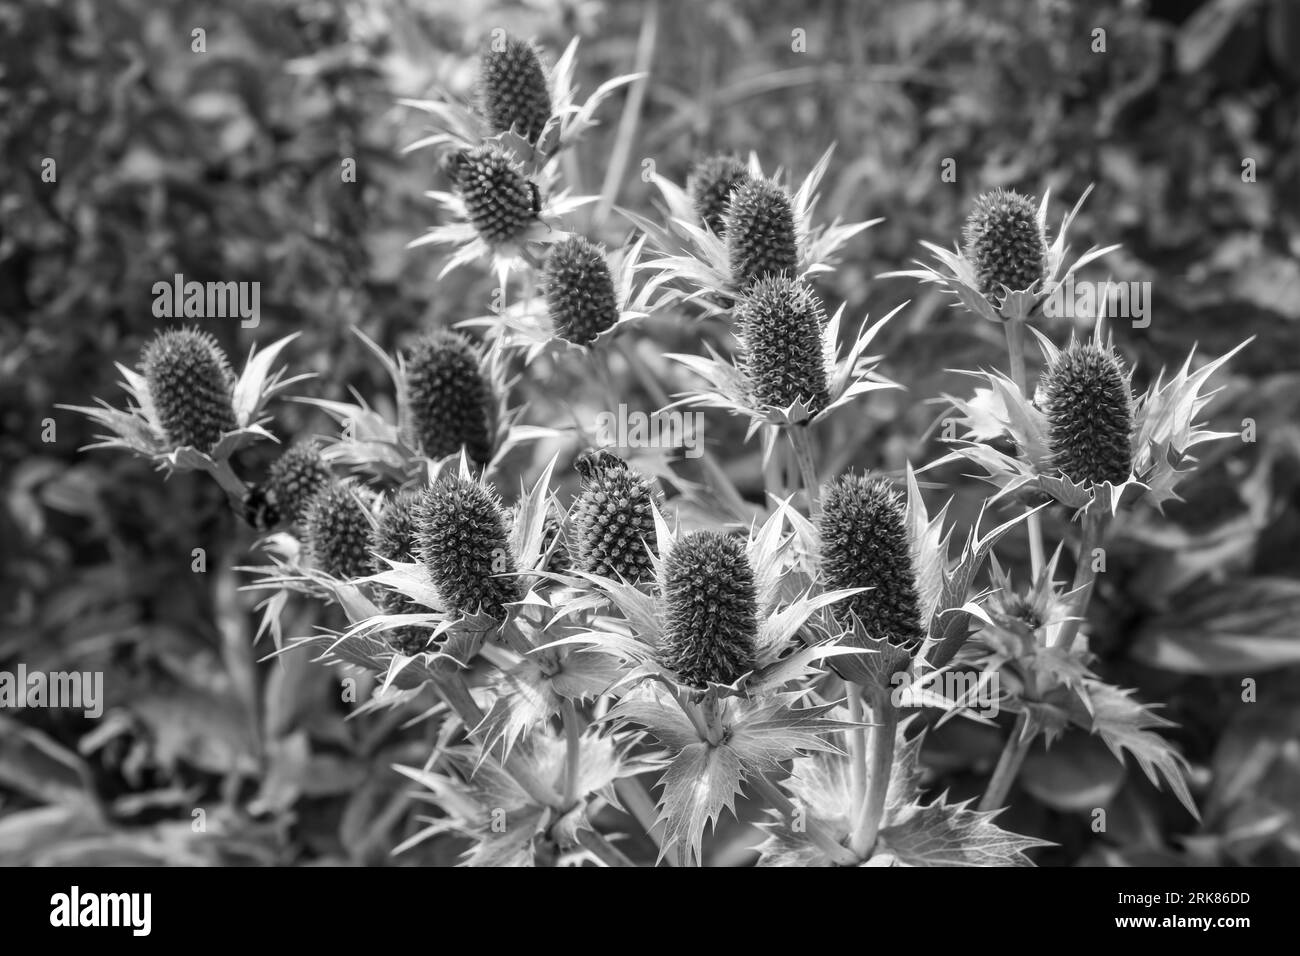 Eryngiums also known as sea holly with spiny leaves and a characteristic ruff around the flowerheads in black and white Stock Photo